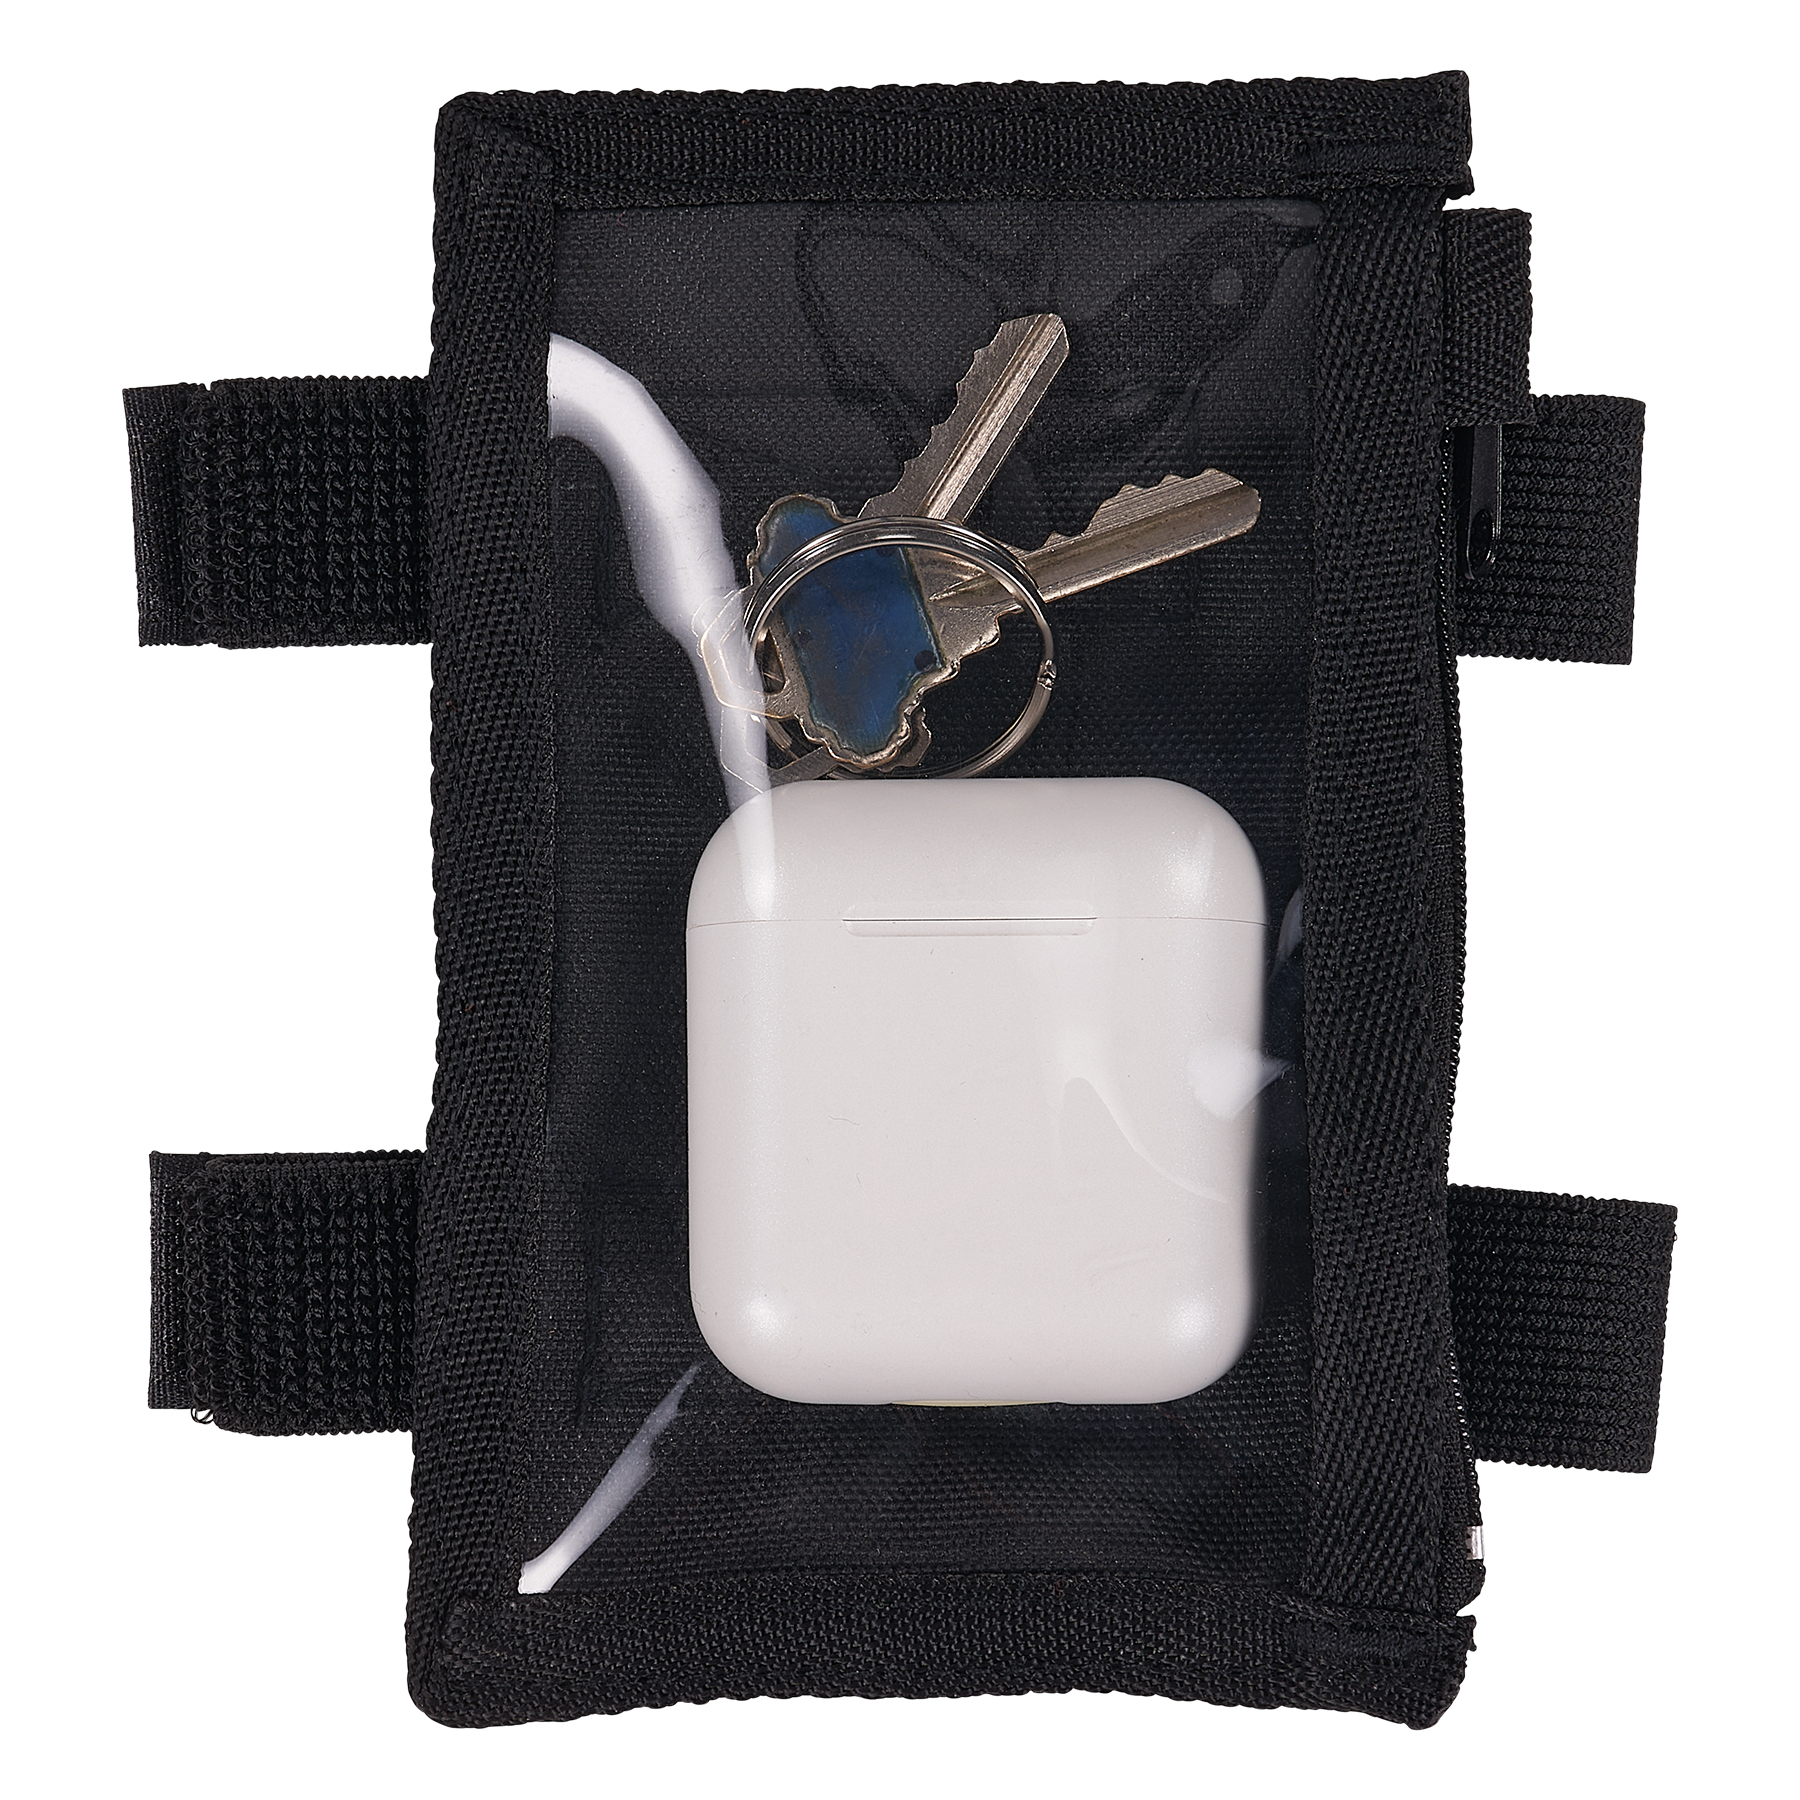 https://www.ergodyne.com/sites/default/files/product-images/19959-3387-dual-band-id-badge-holder-front-propped.jpg